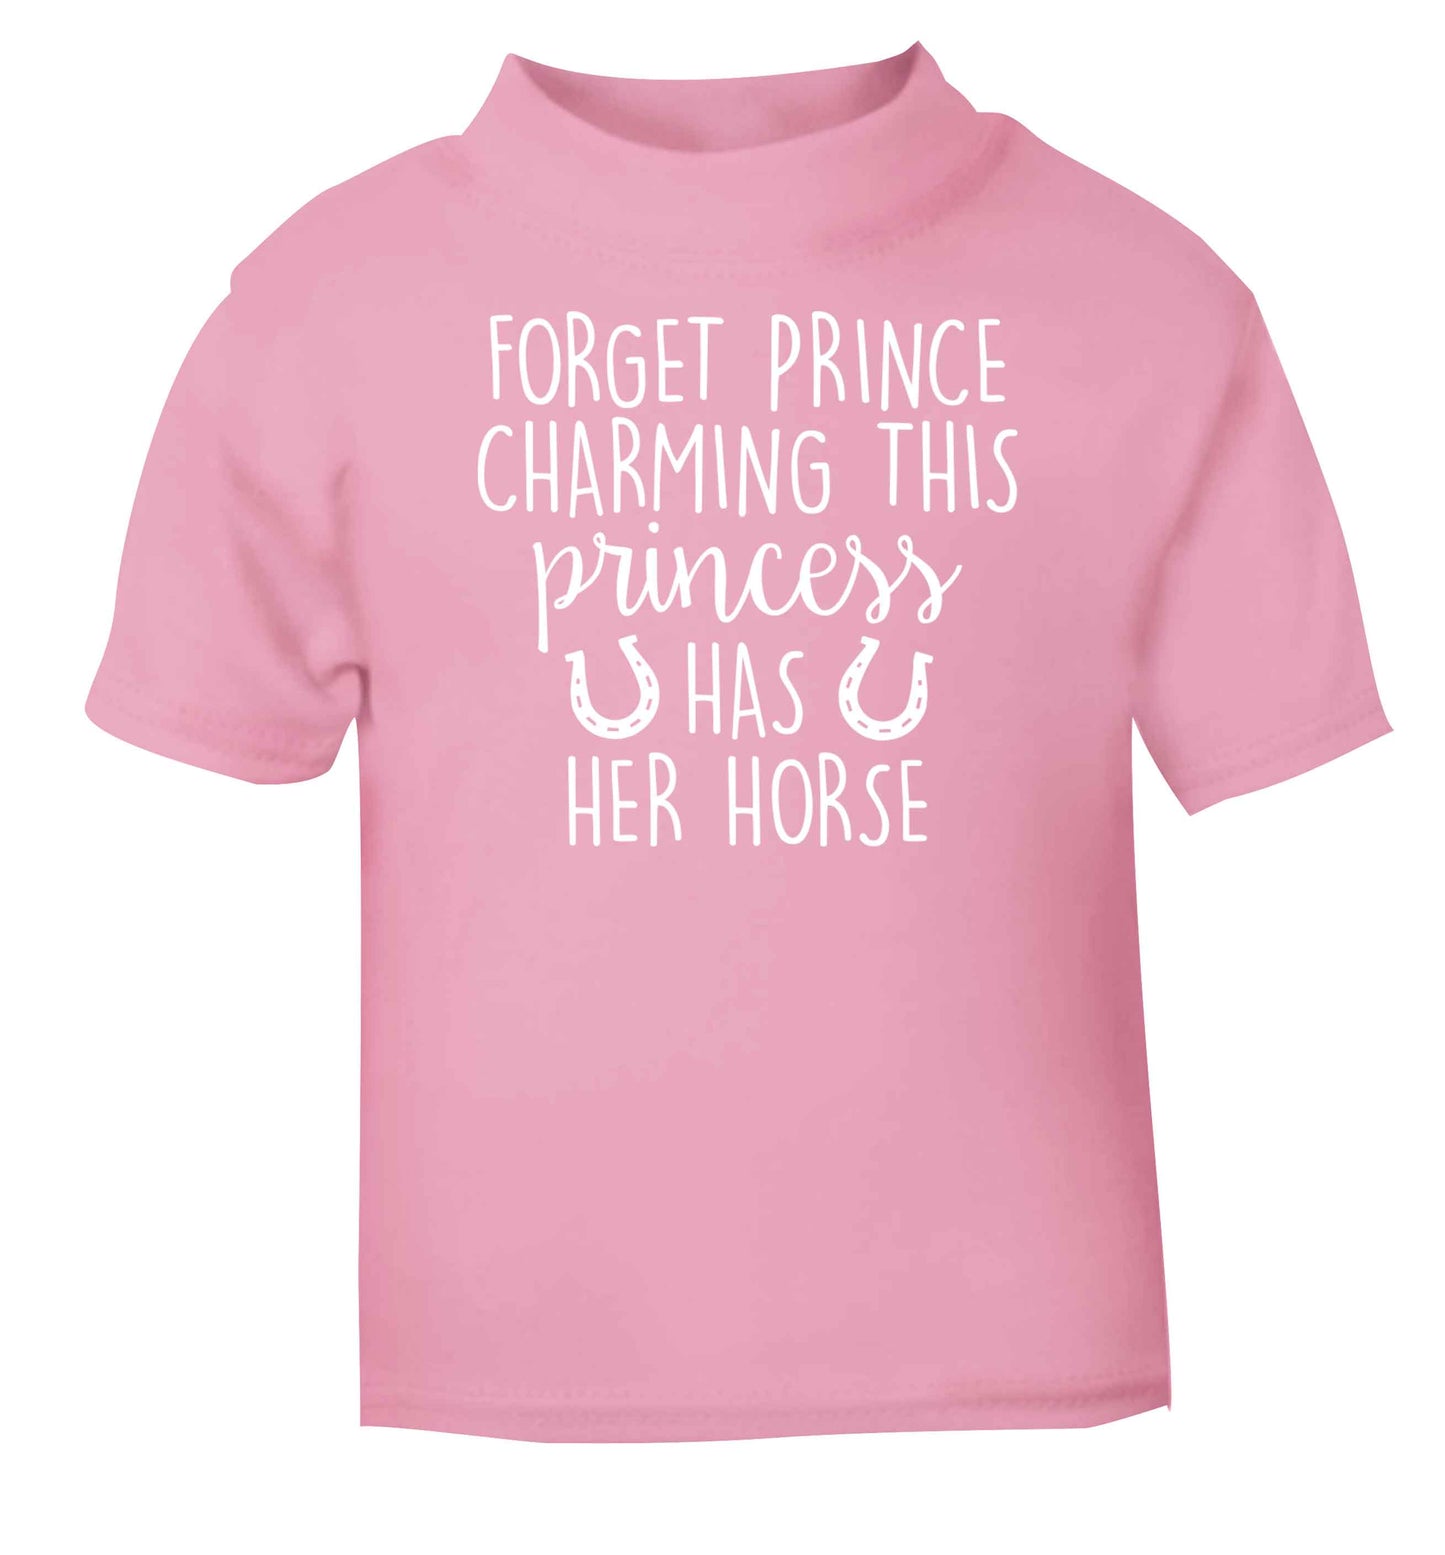 Forget prince charming this princess has her horse light pink baby toddler Tshirt 2 Years